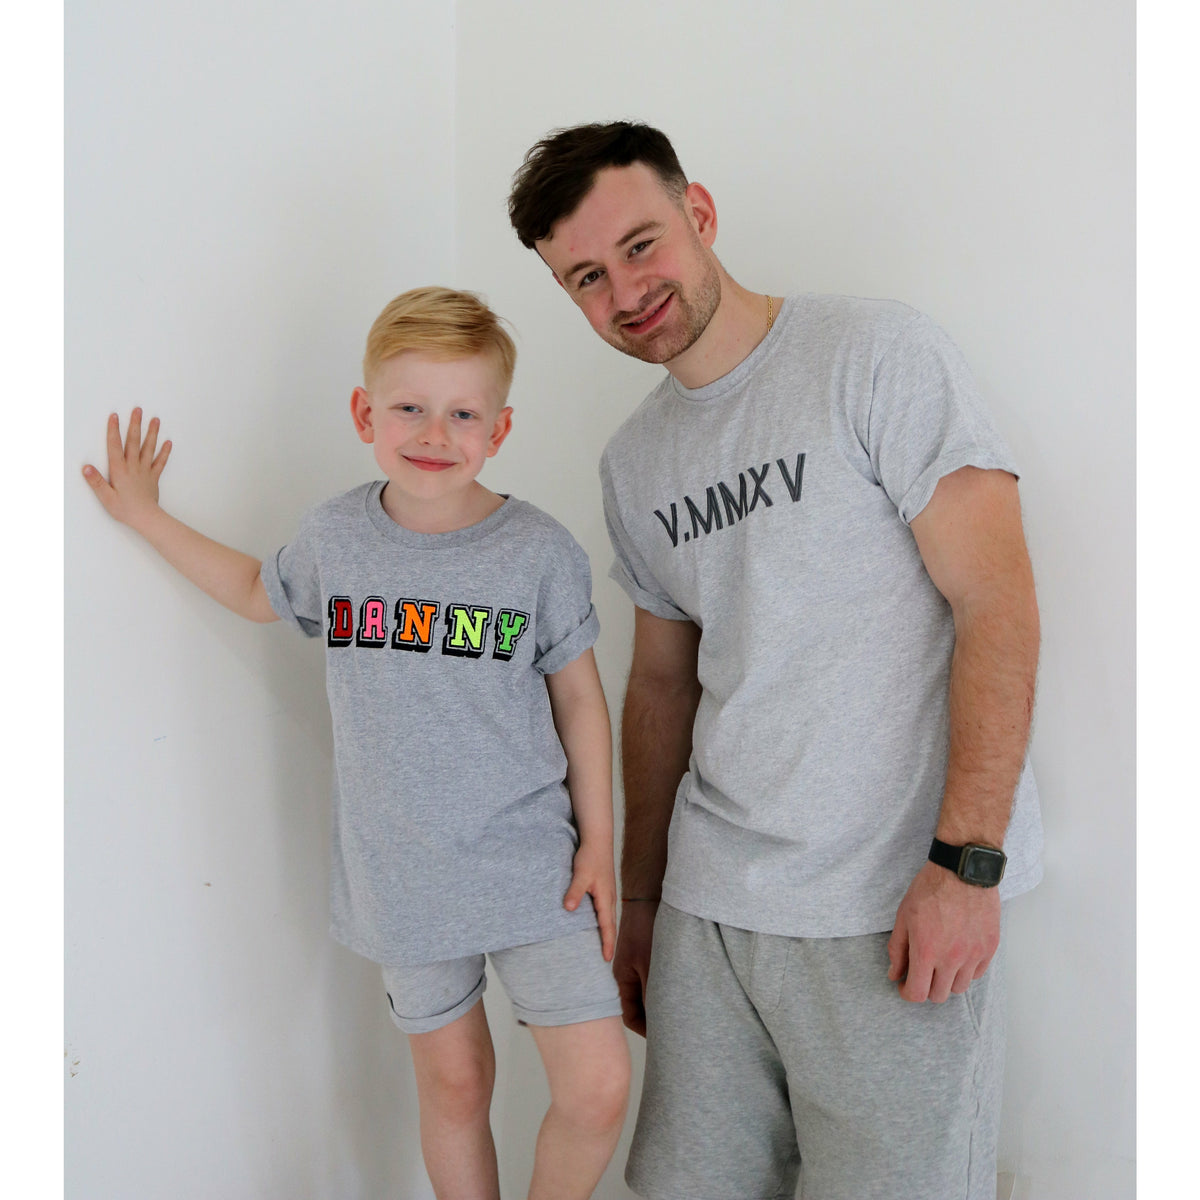 Kids t-shirt personalised 3D text or initials